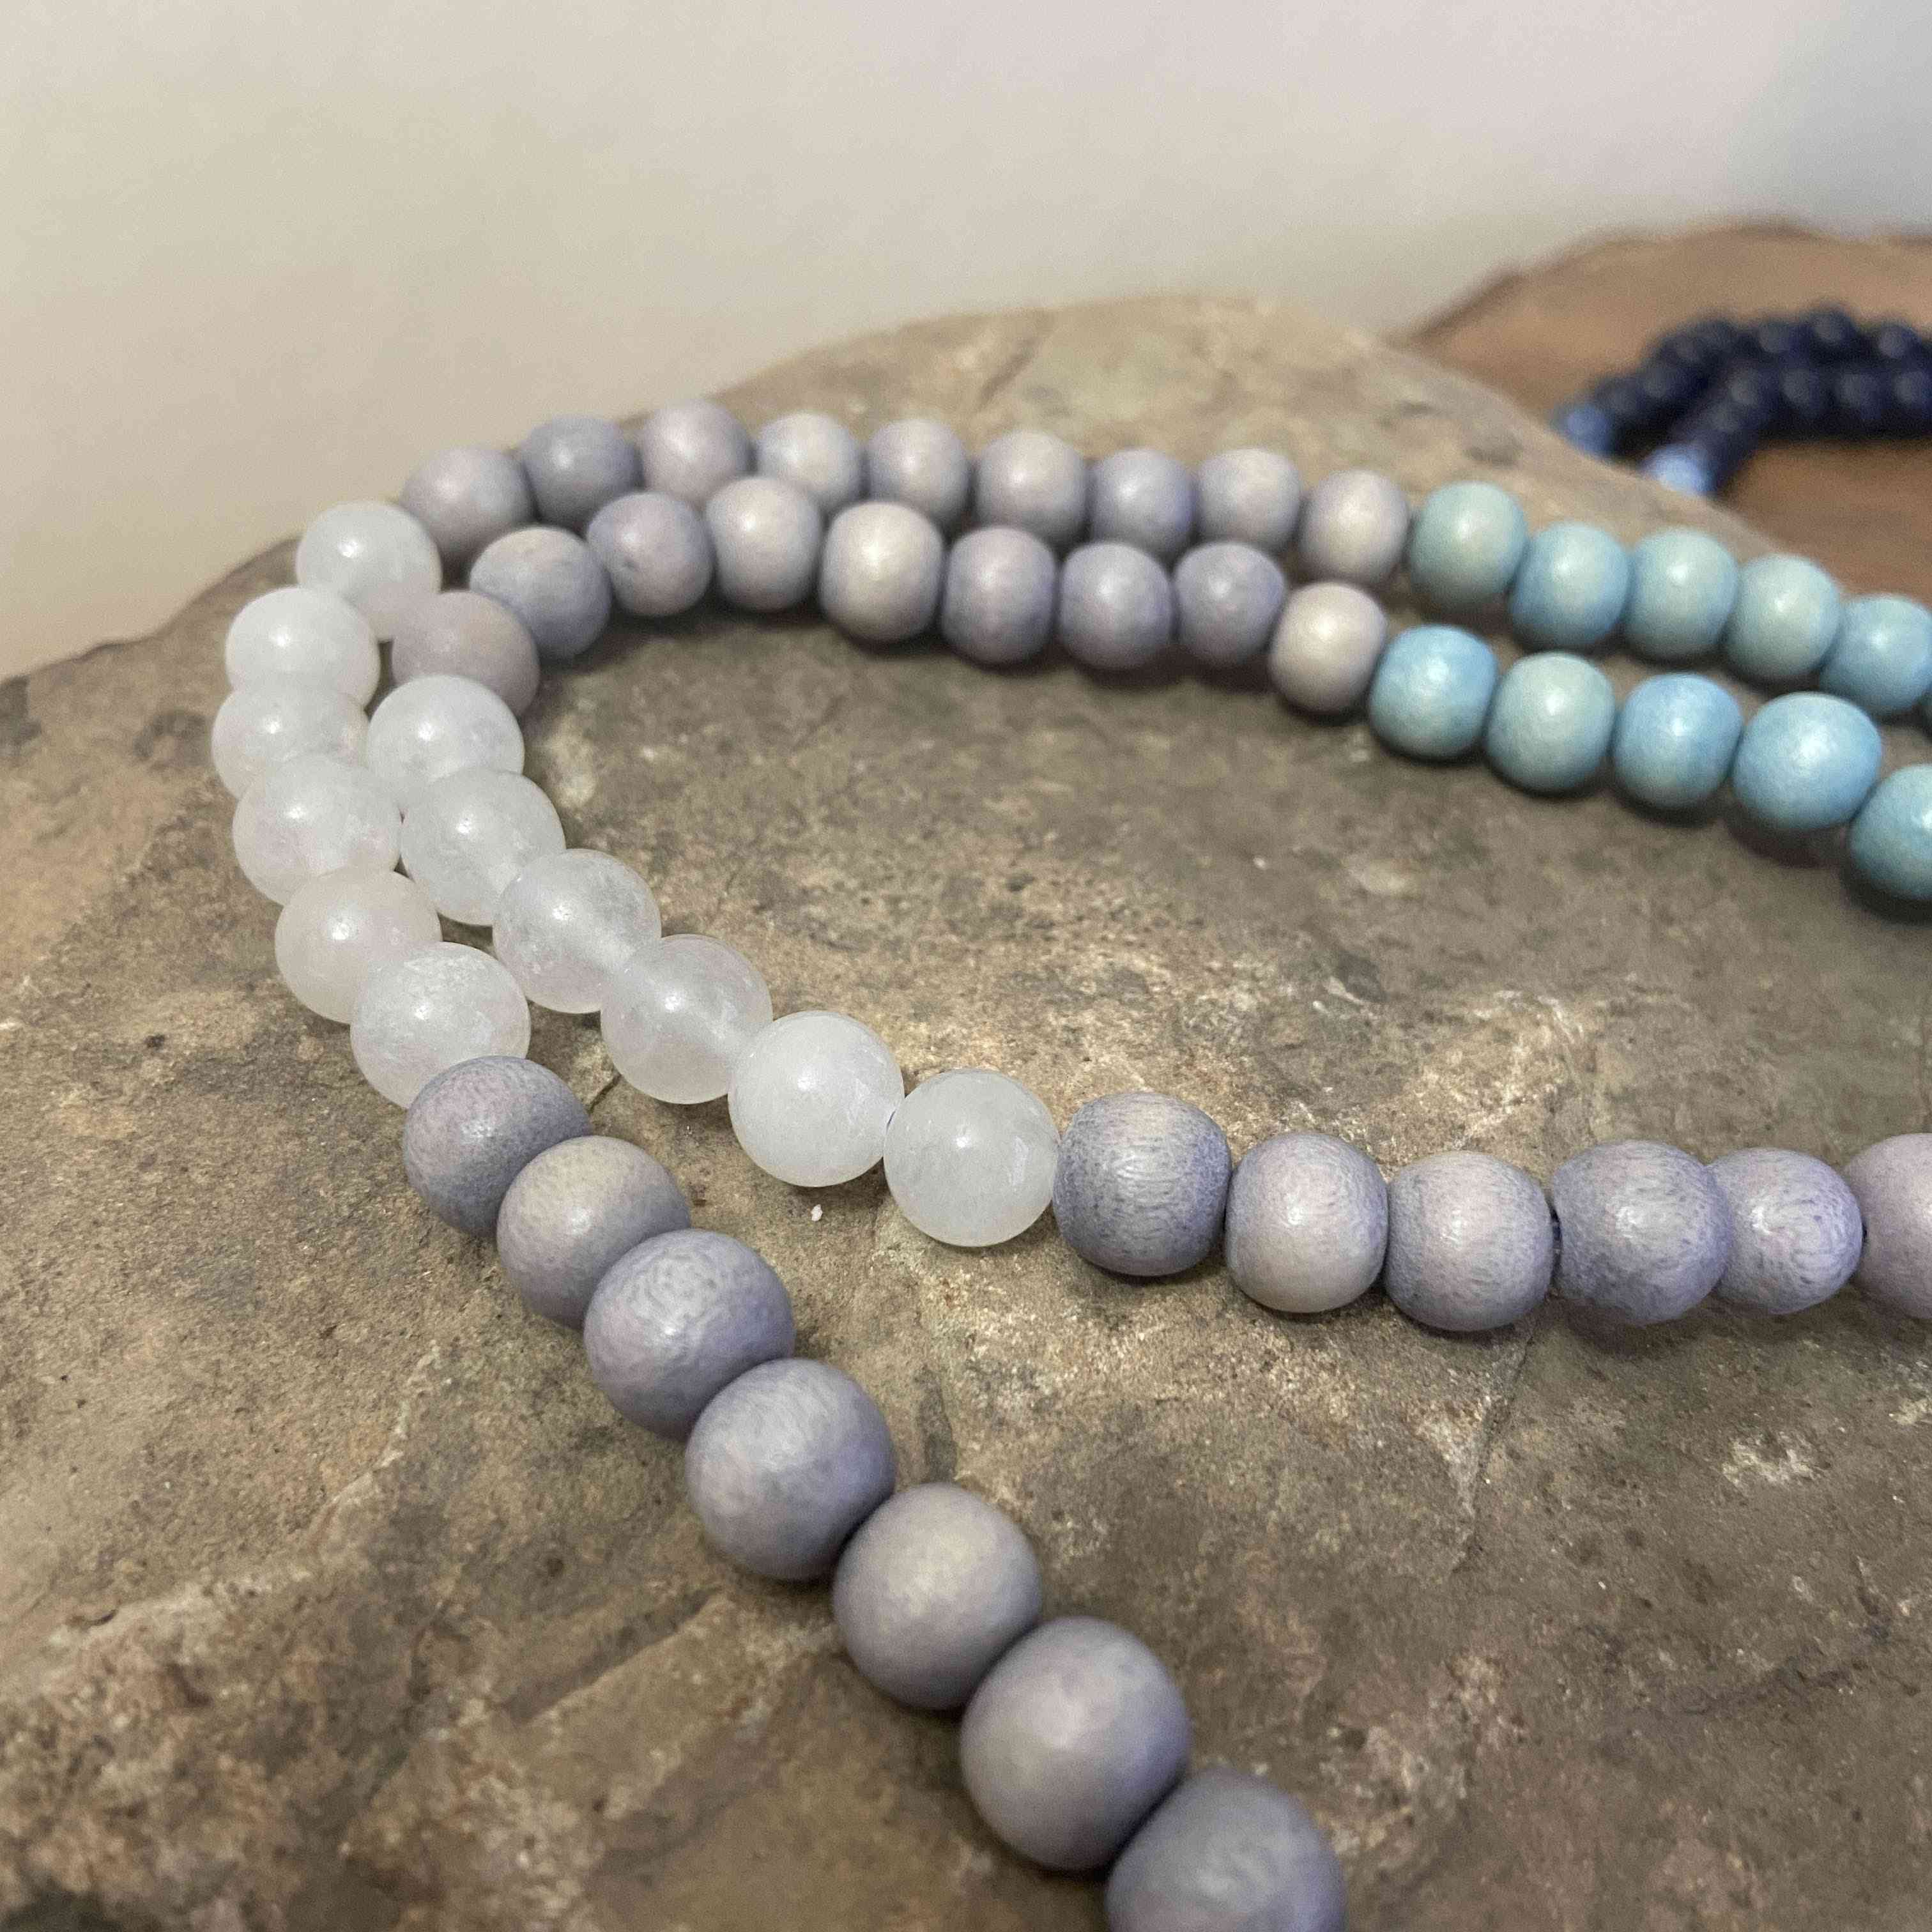 Wooden Beads And Stone Malas